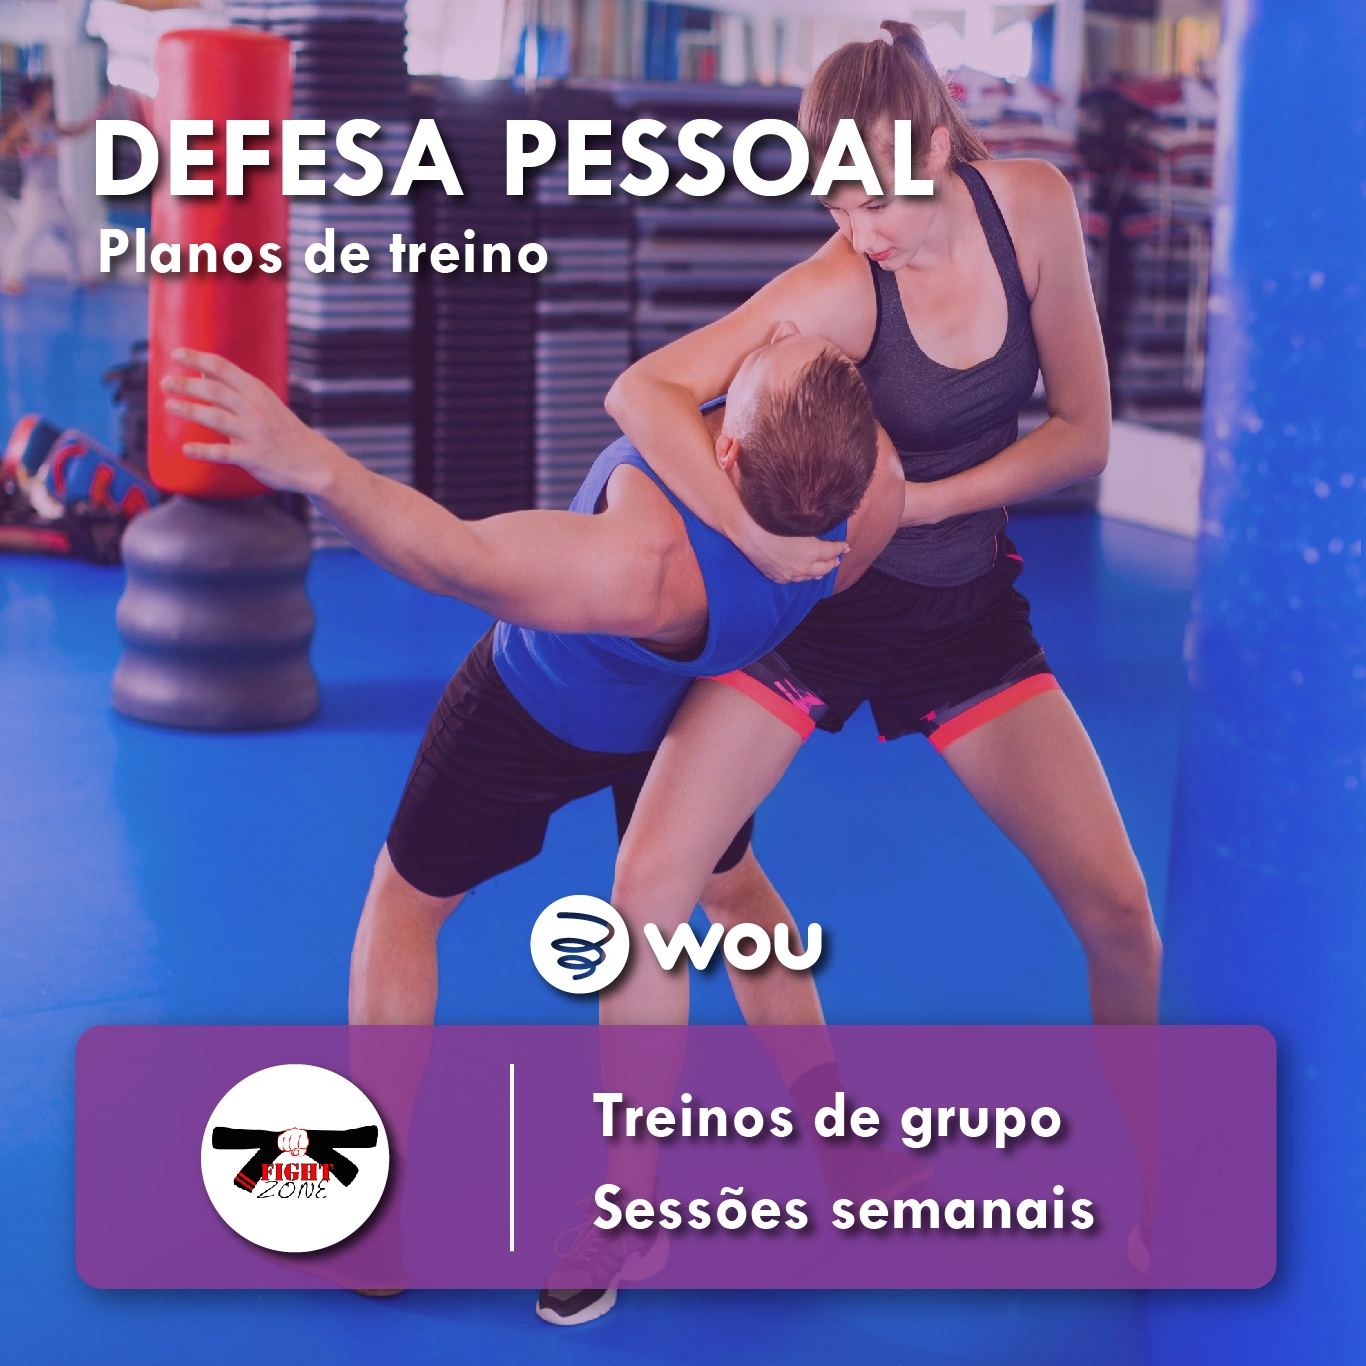 Personal Defence Classes in Aveiro